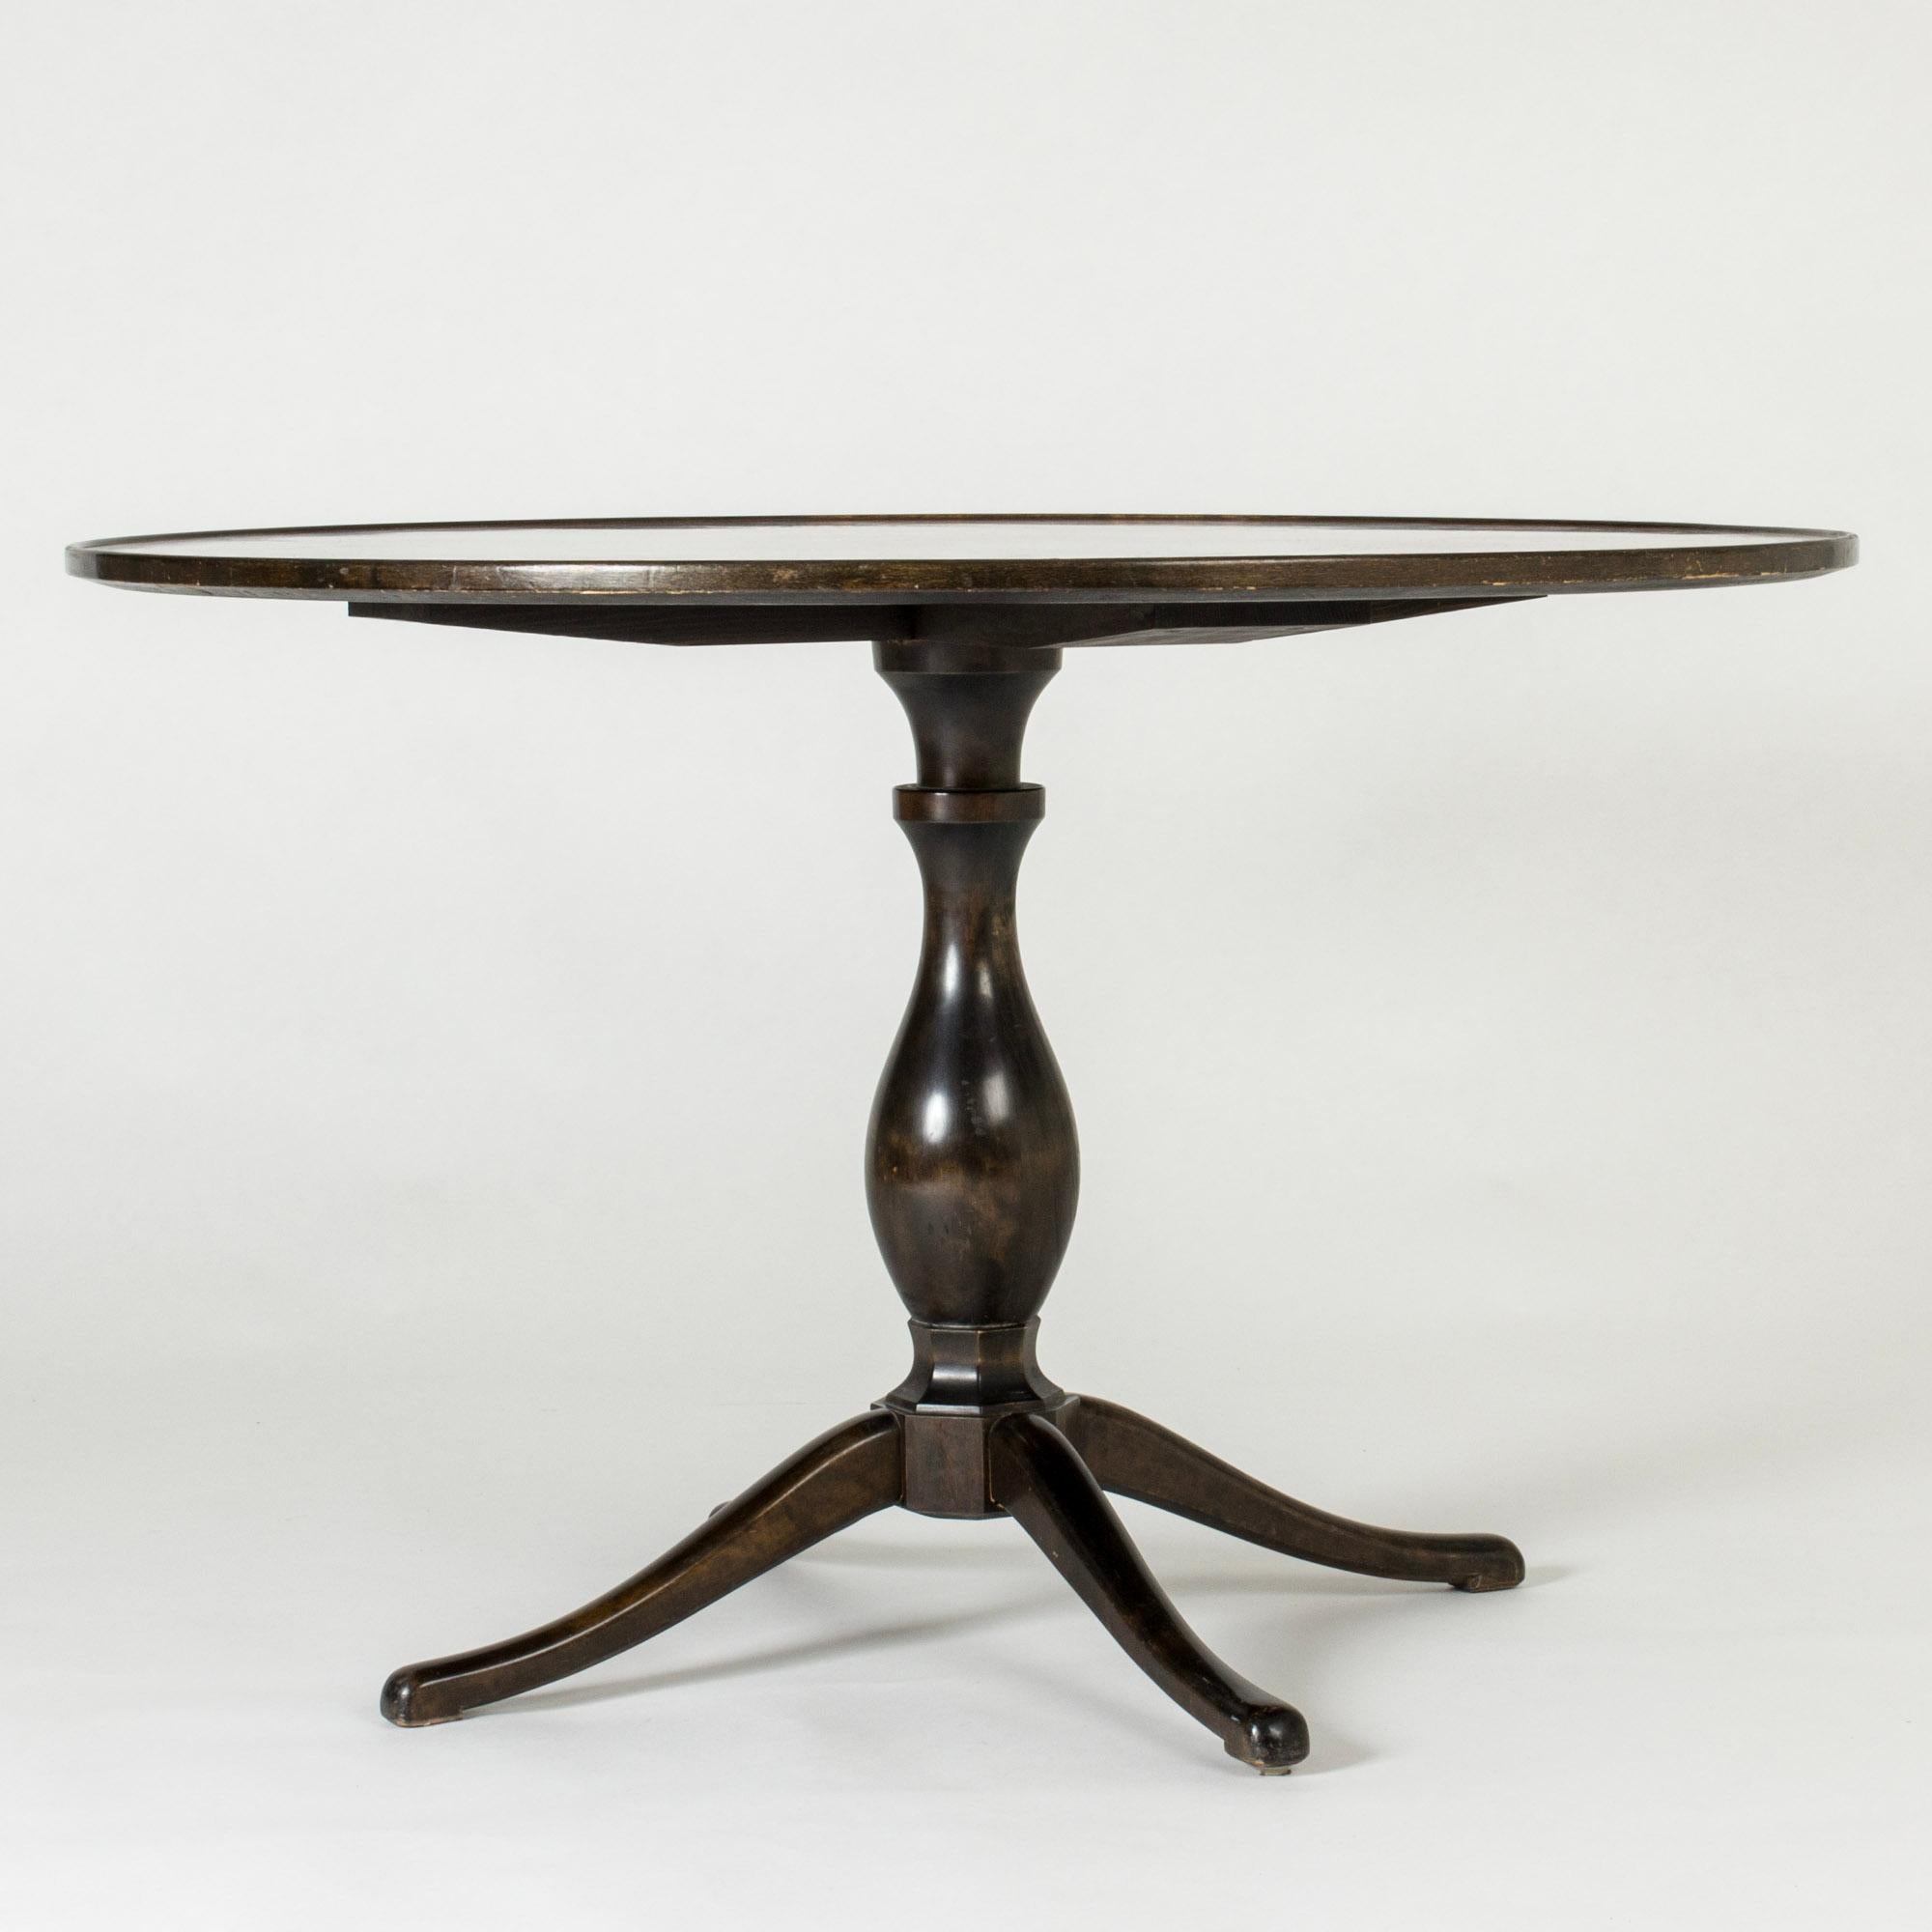 Elegant “Haga” dining table by Carl Malmsten, with a curvesome stained wooden base. Round table top with warm mahogany veneer in a checkered pattern.